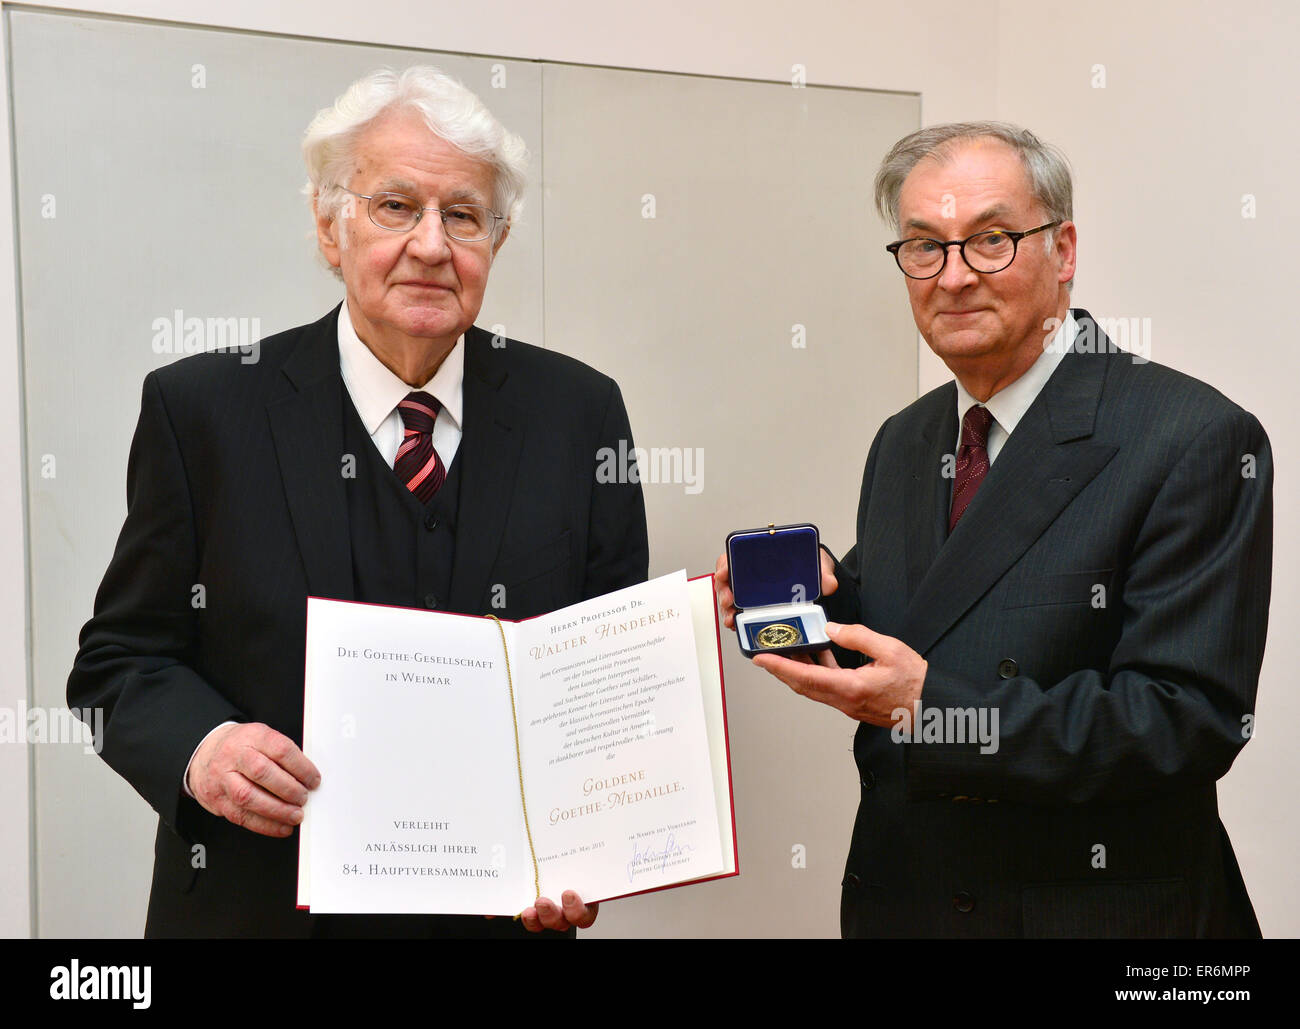 The German philologist Walter Hinderer (L) who teaches in Princeton  receives the golden Goethe medal from the President of the Goethe society,  Jochen Golz, during the 84th general assembly of the Goethe